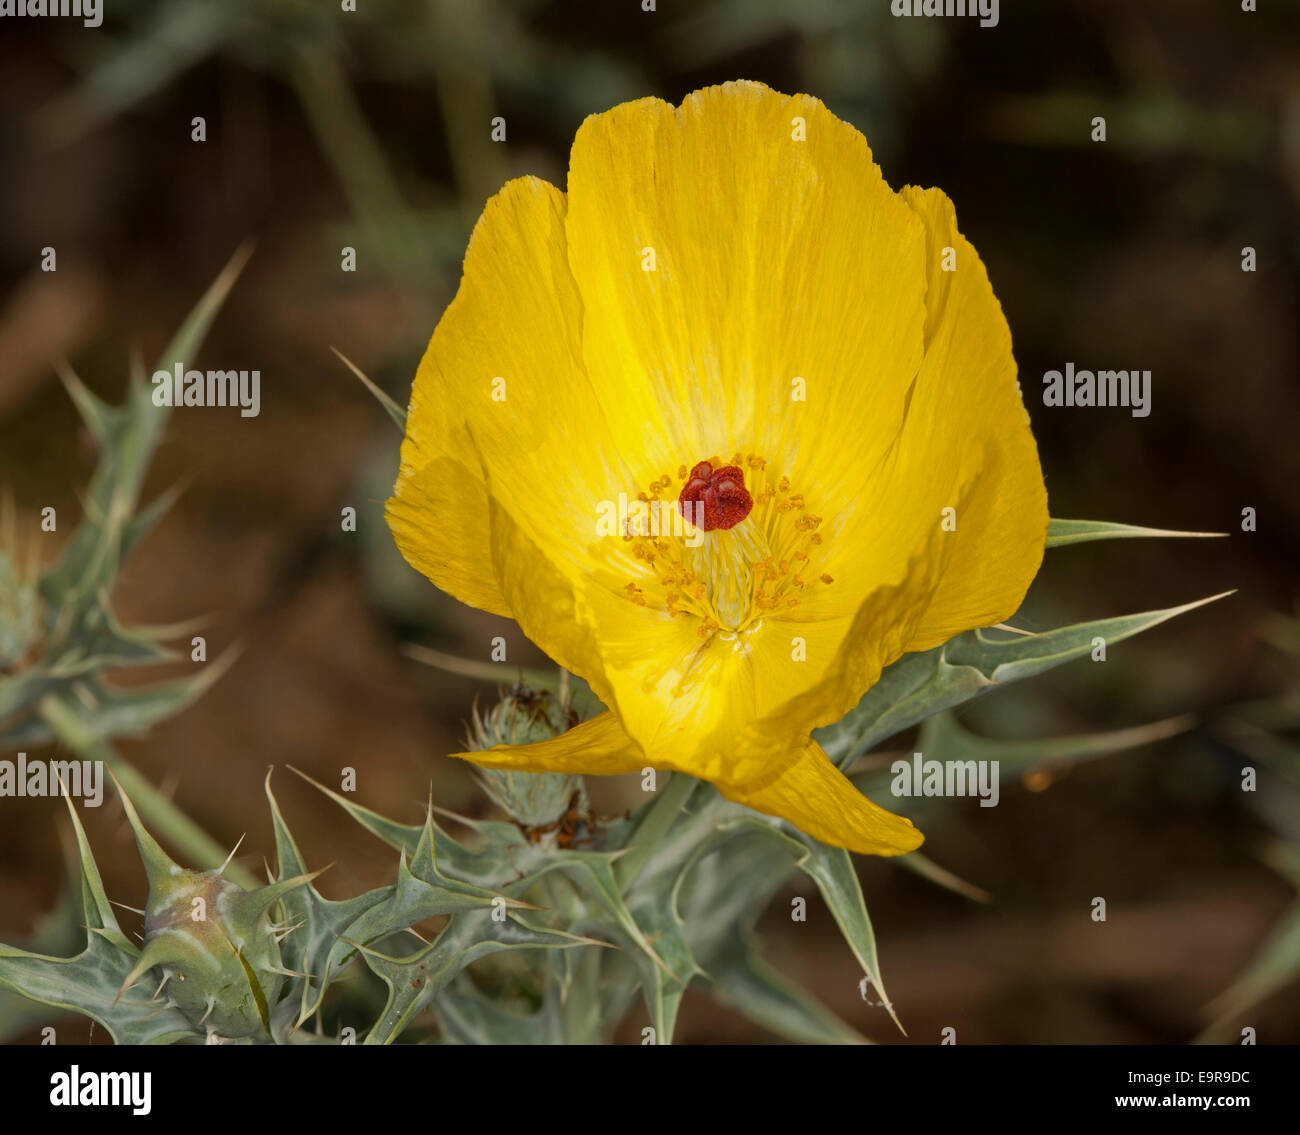 Spectacular vivid yellow flower & blue / green spiny foliage of Mexican prickly poppy, Argenone ochroleuca, an Australian weed Stock Photo